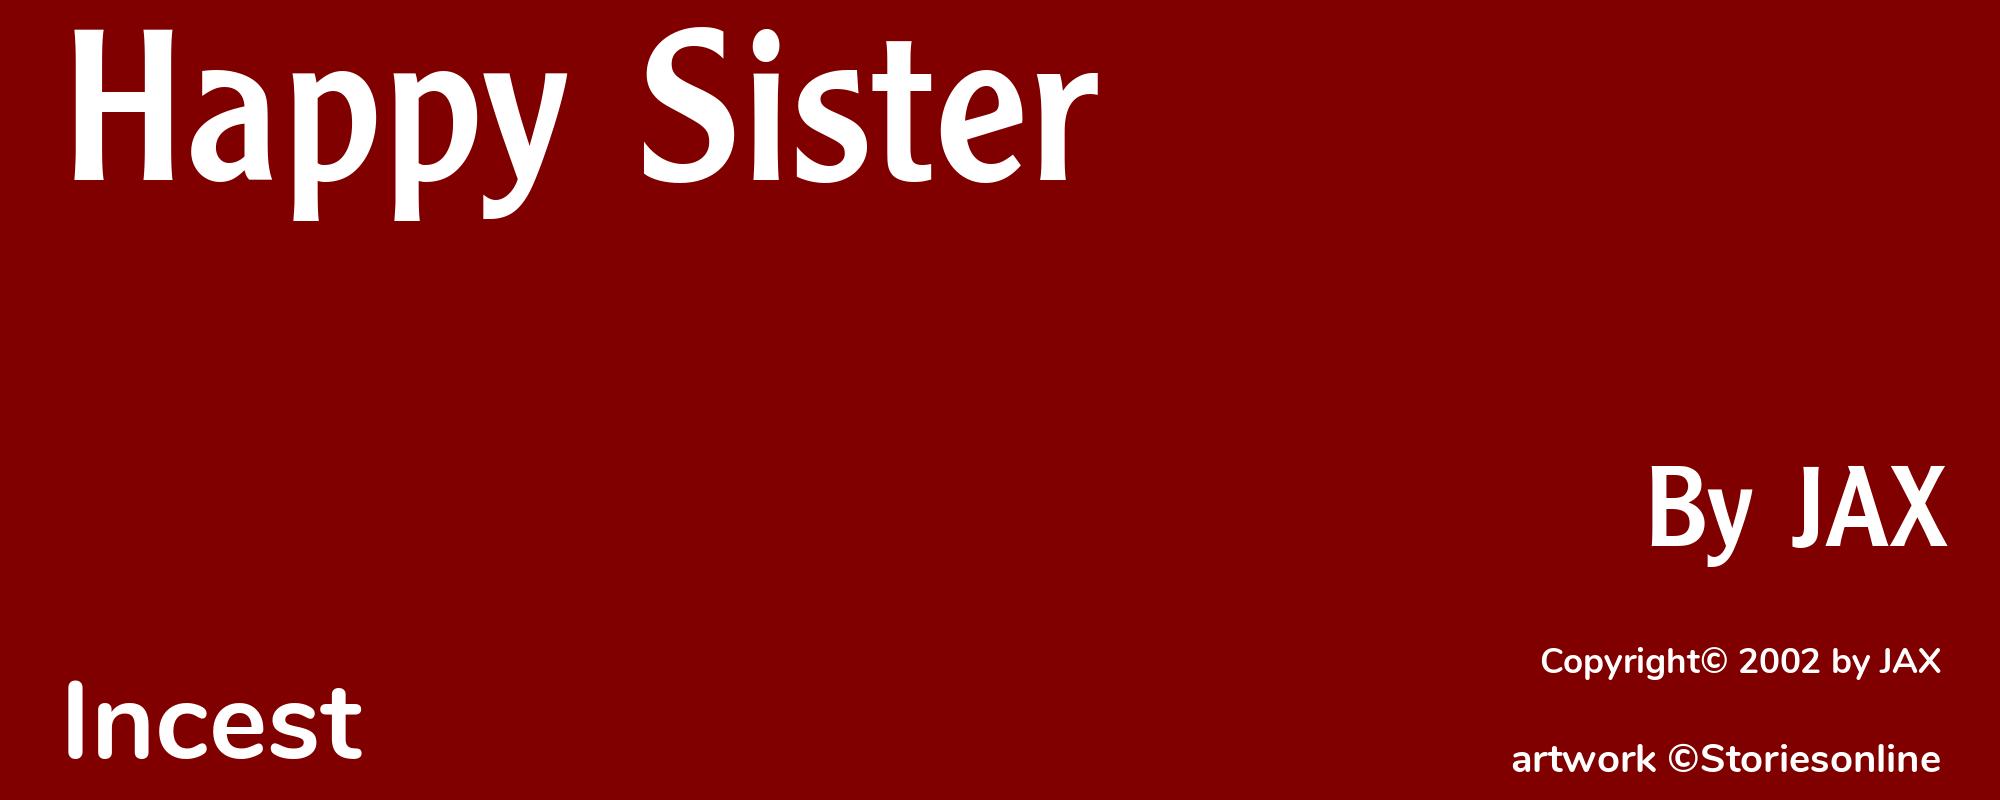 Happy Sister - Cover